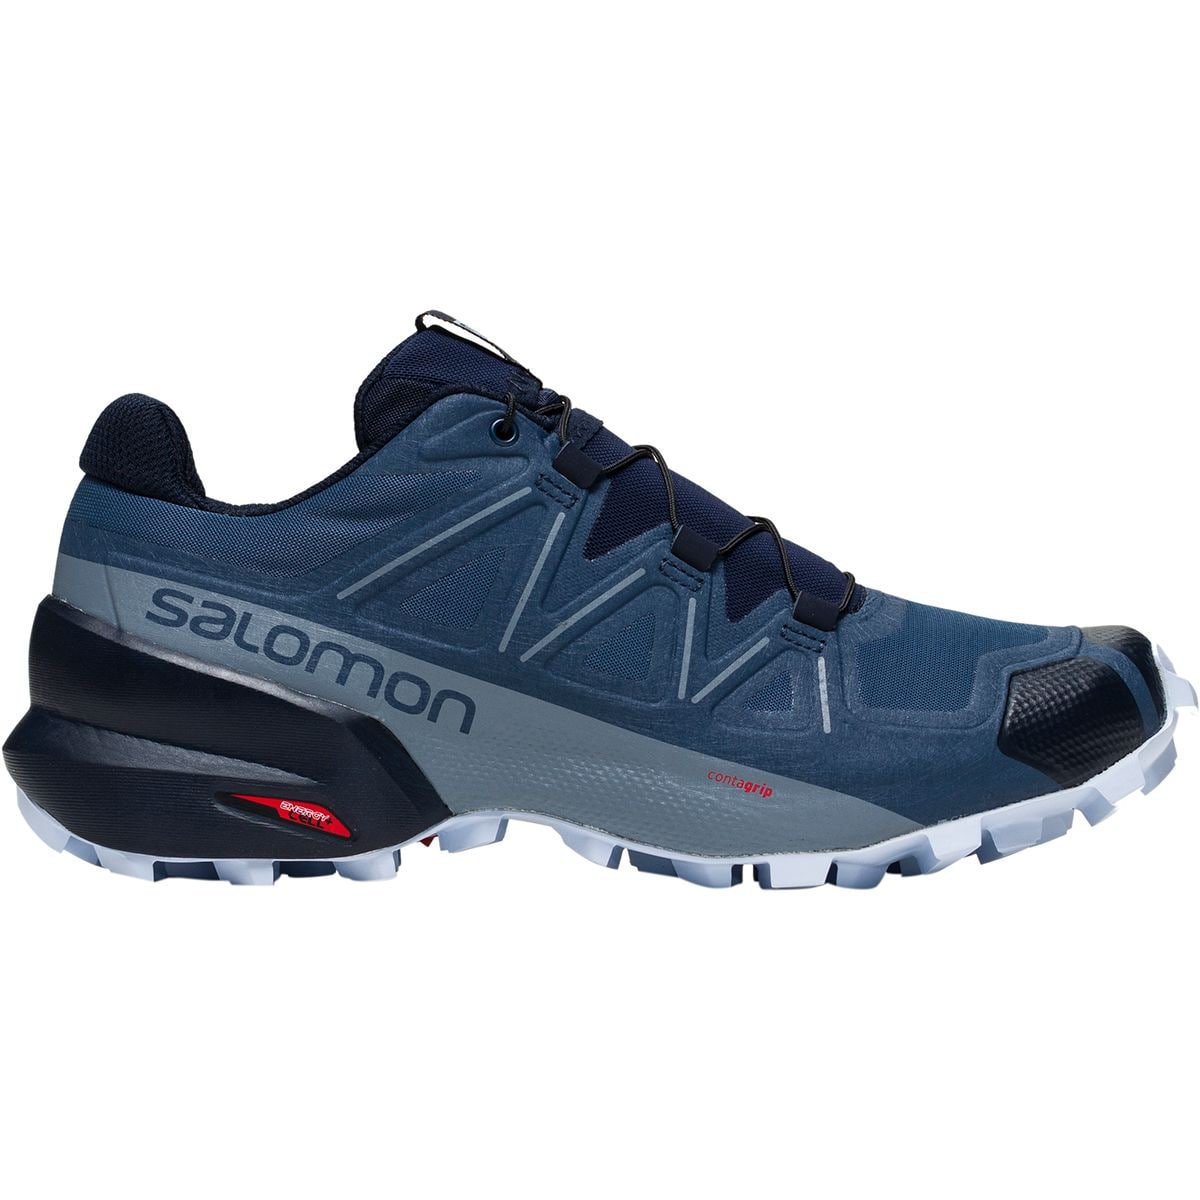 wide trail running shoes